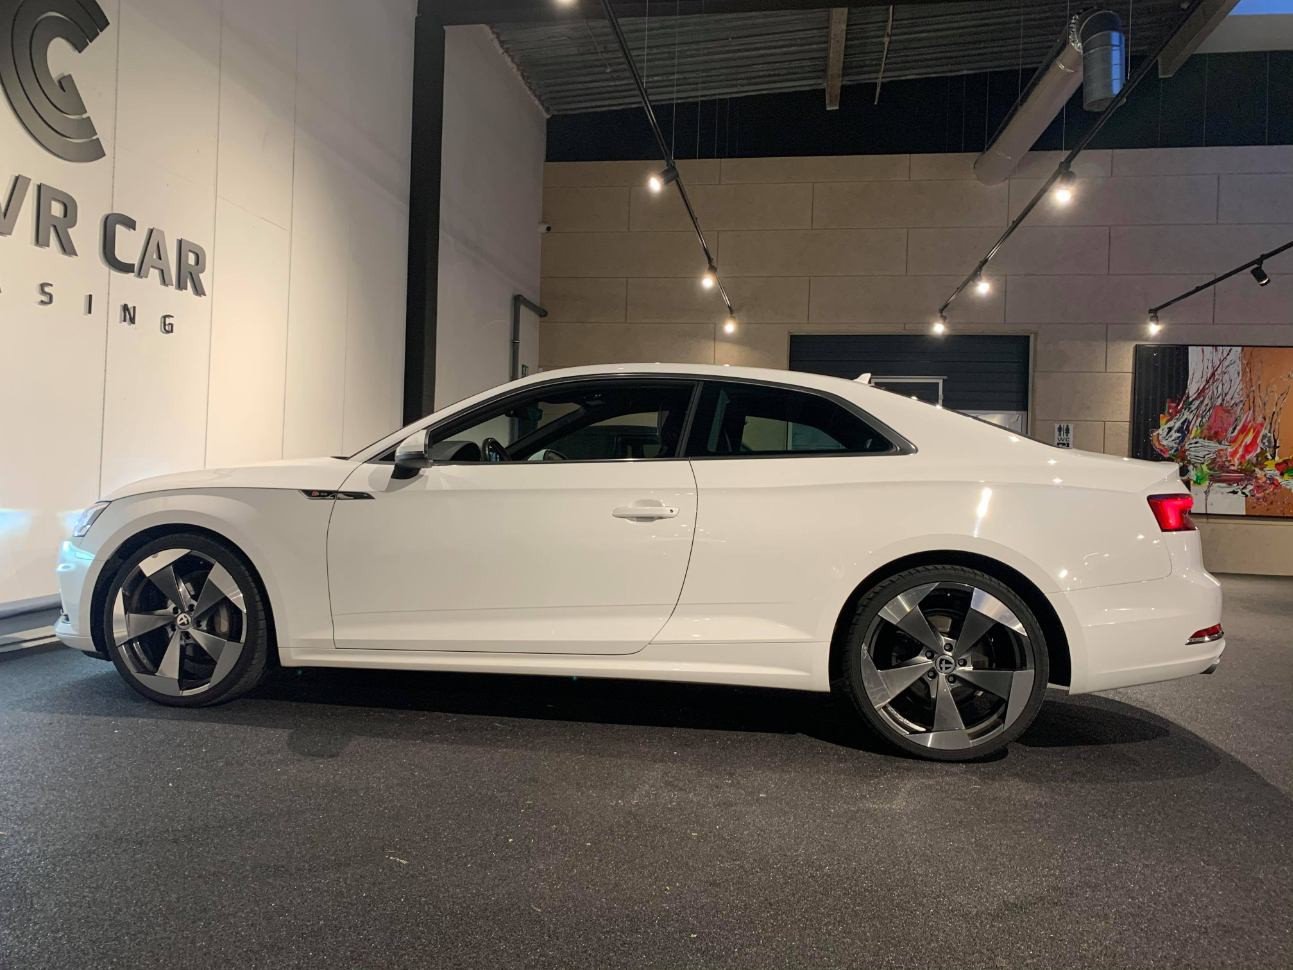 flexleasing-audi-a5-coupe-s-line-20-tdi-190-hk-s-tronic-findleasing